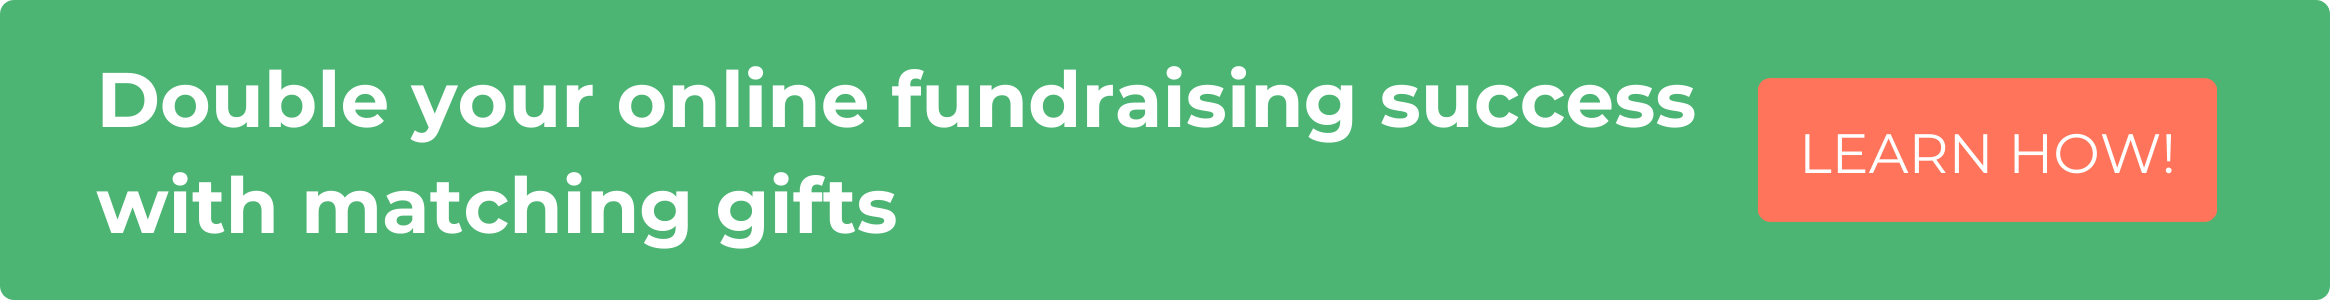 Matching Gifts and Online Fundraising CTA